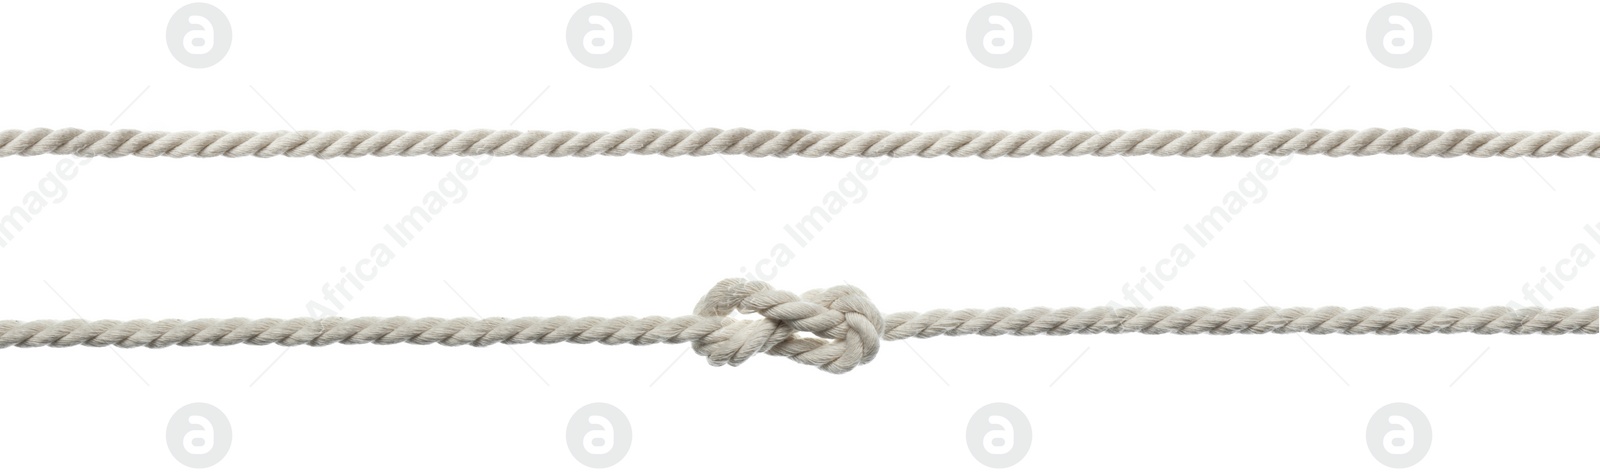 Image of Durable organic cotton ropes on white background